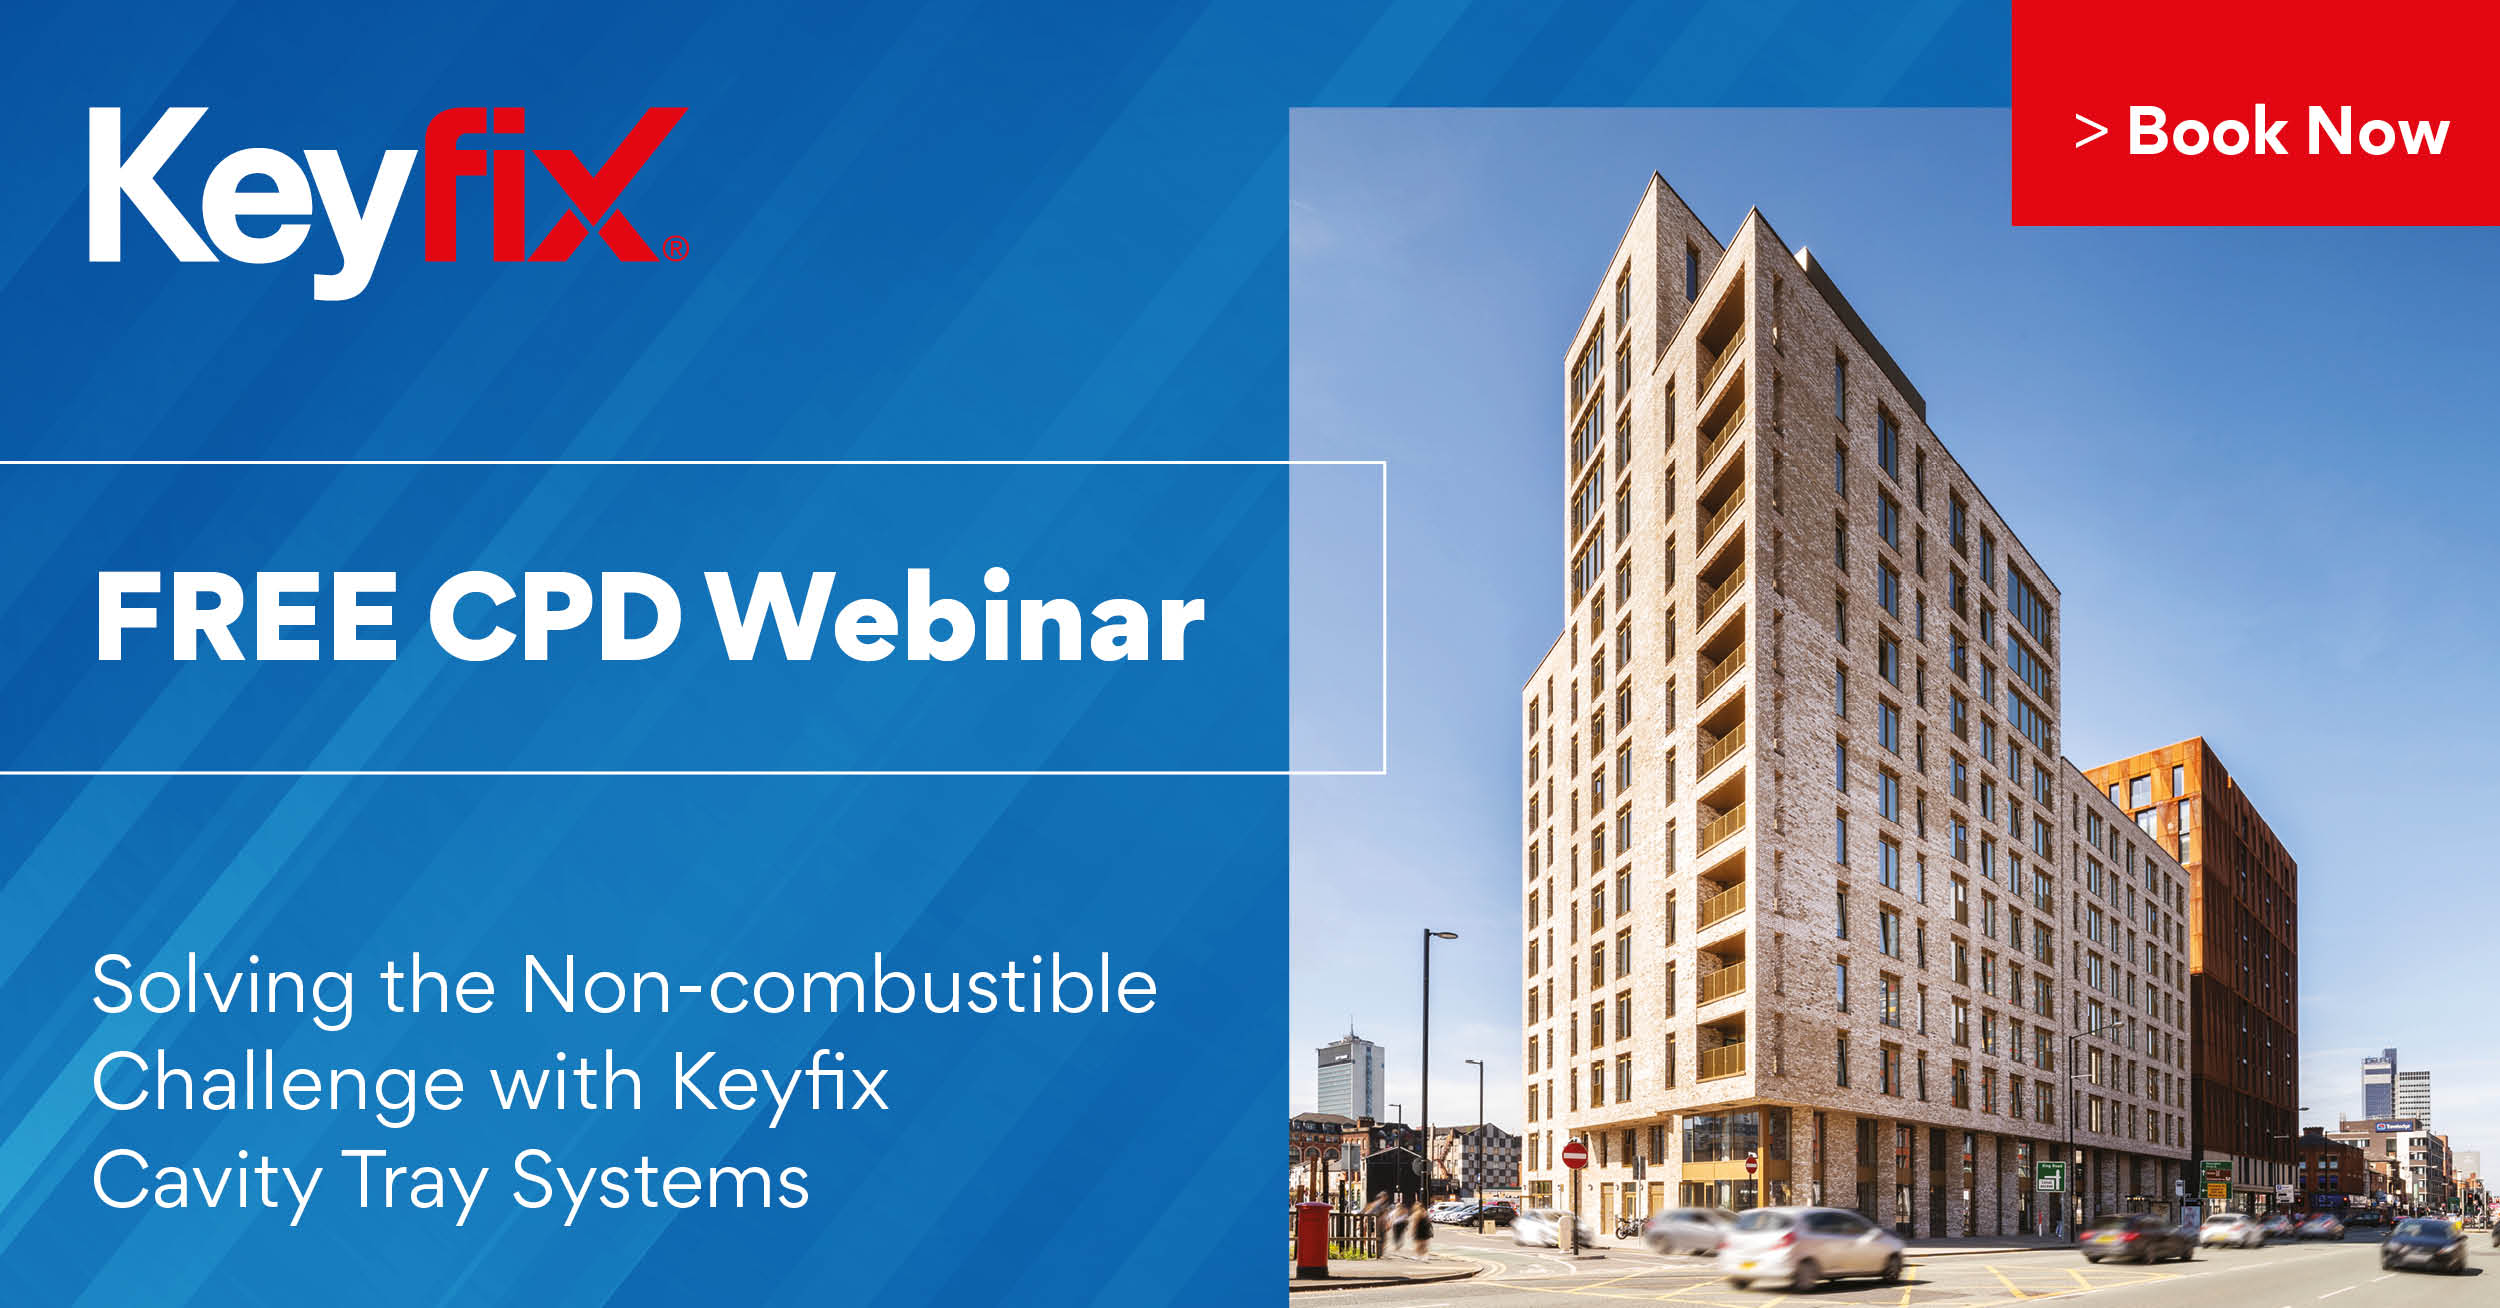 Keyfix DCE CPD Webinar – Solving the Non-combustible Challenge